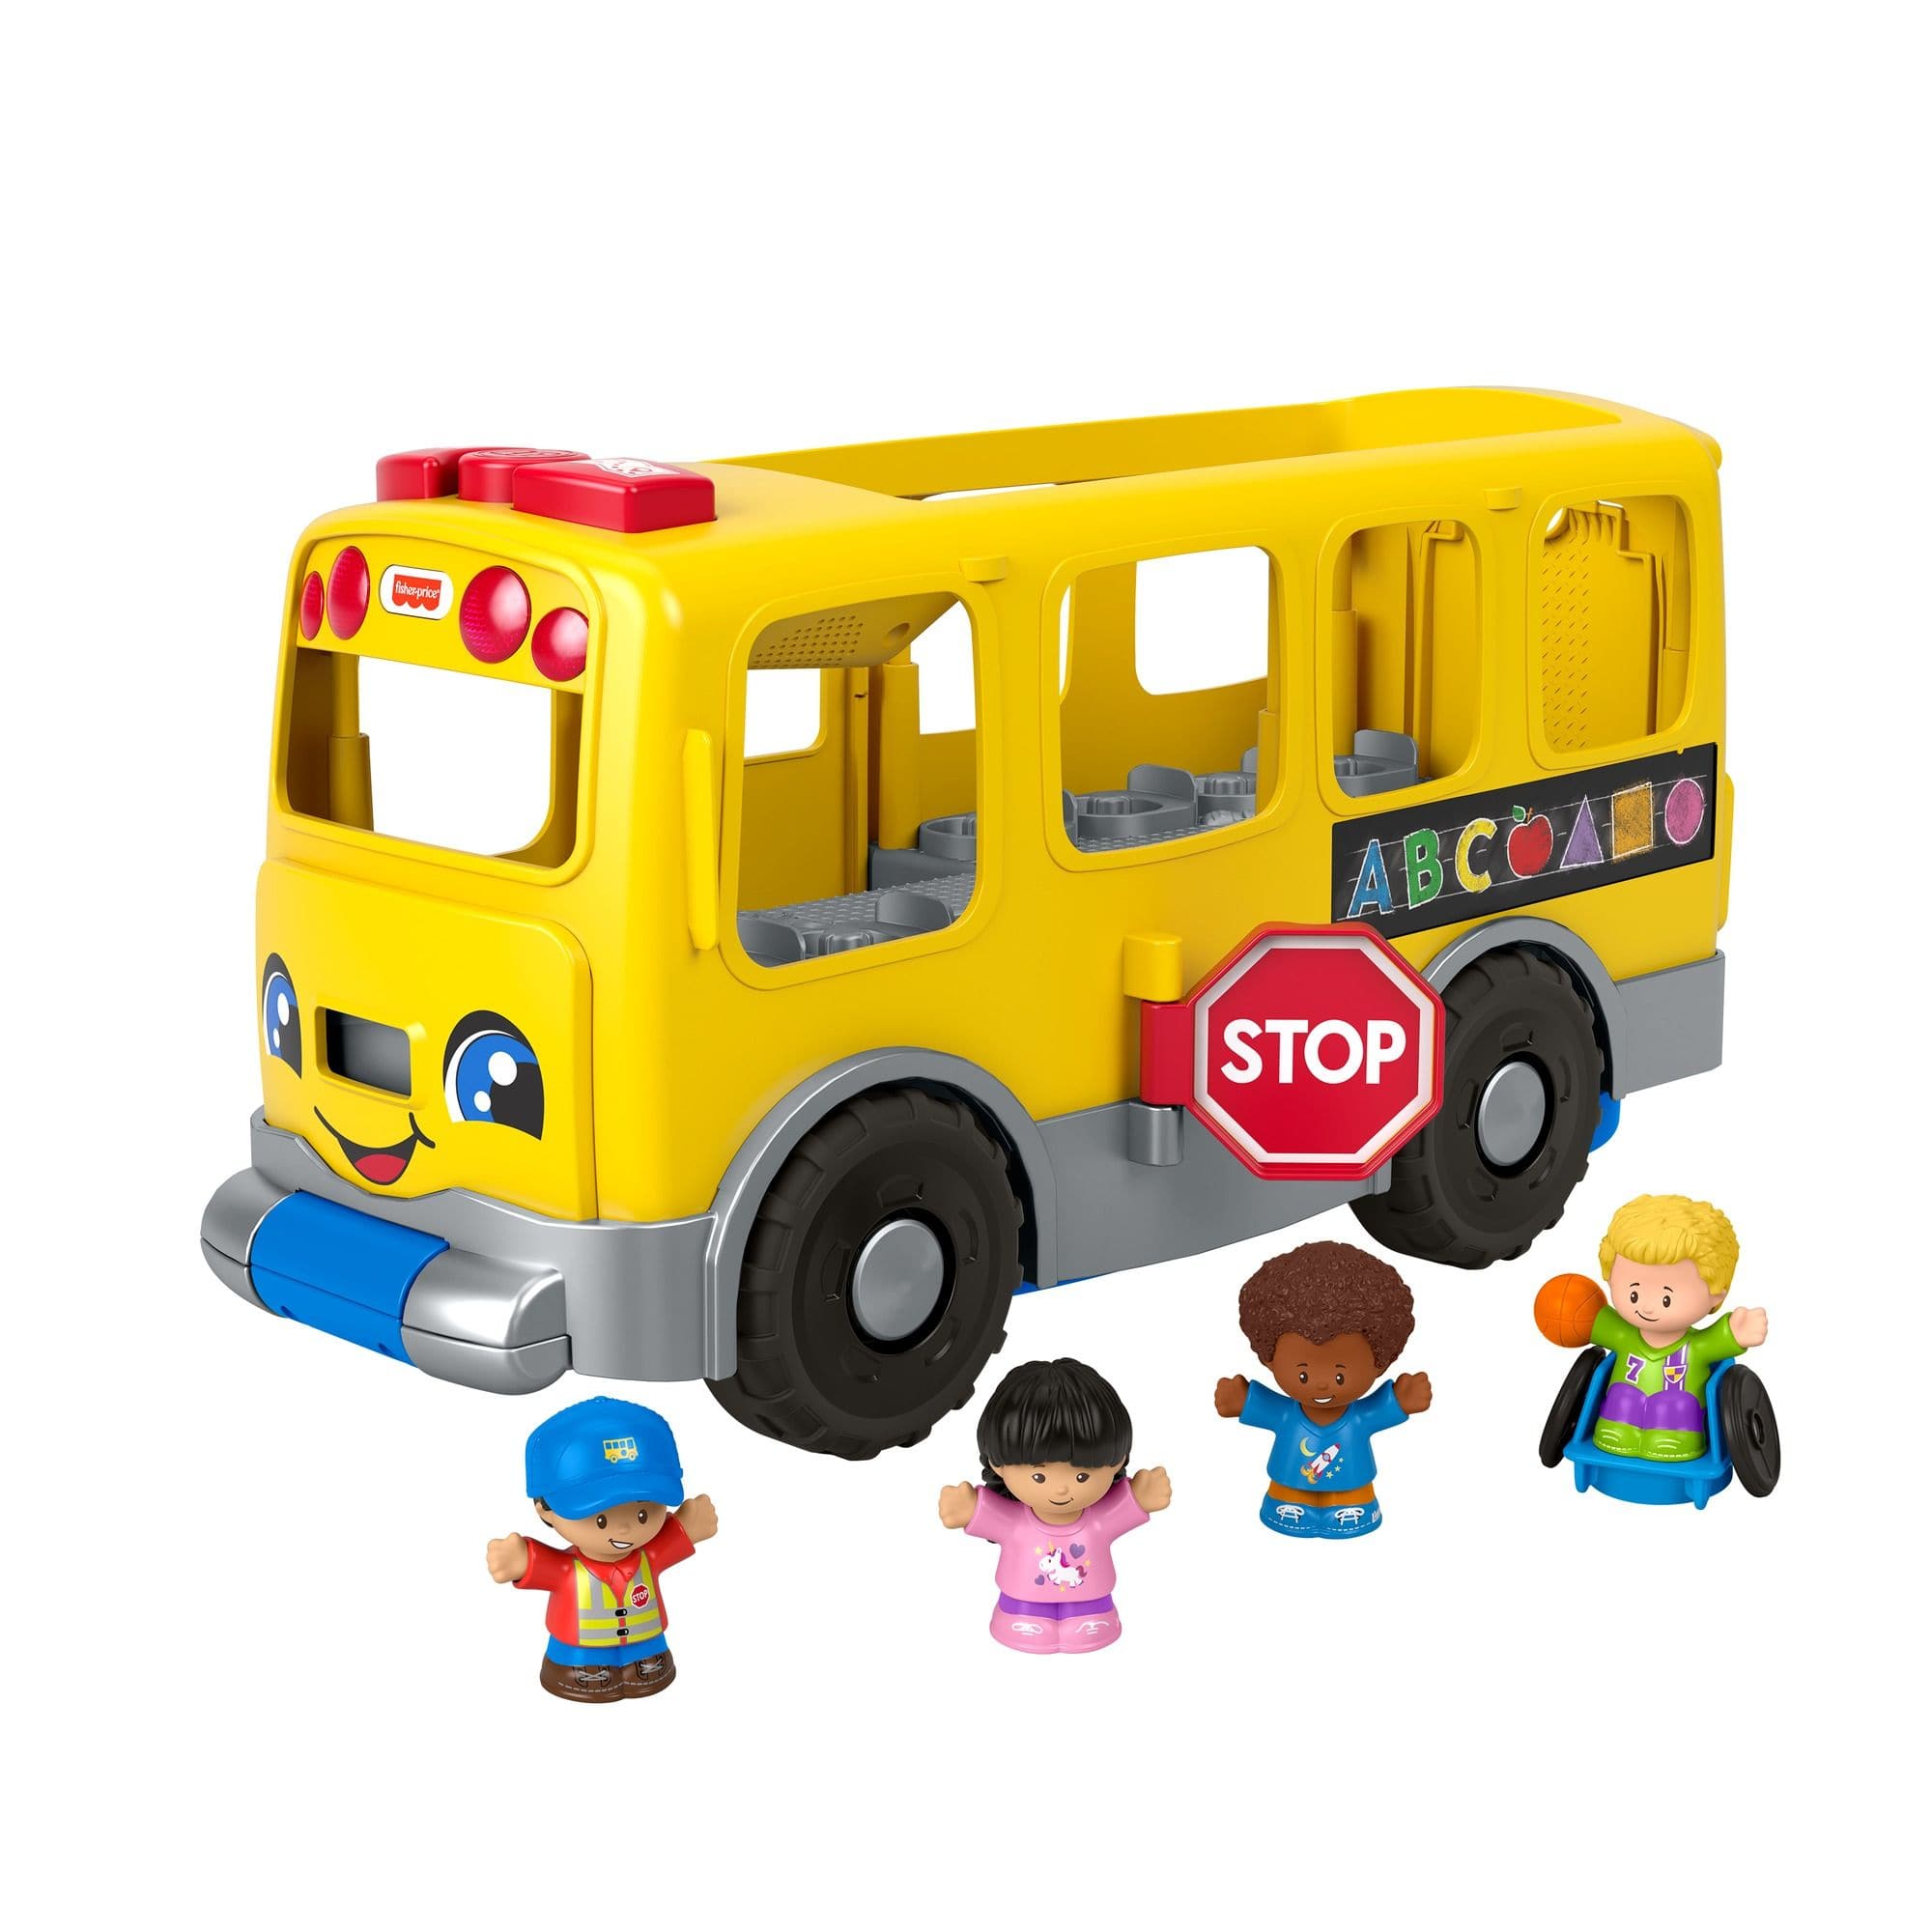 Stages™　Little　Canadian　Yellow　1+　Big　Age　Toy　Bus　Musical　Toddlers,　For　Learning　Tire　Smart　People®　Fisher-Price®　School